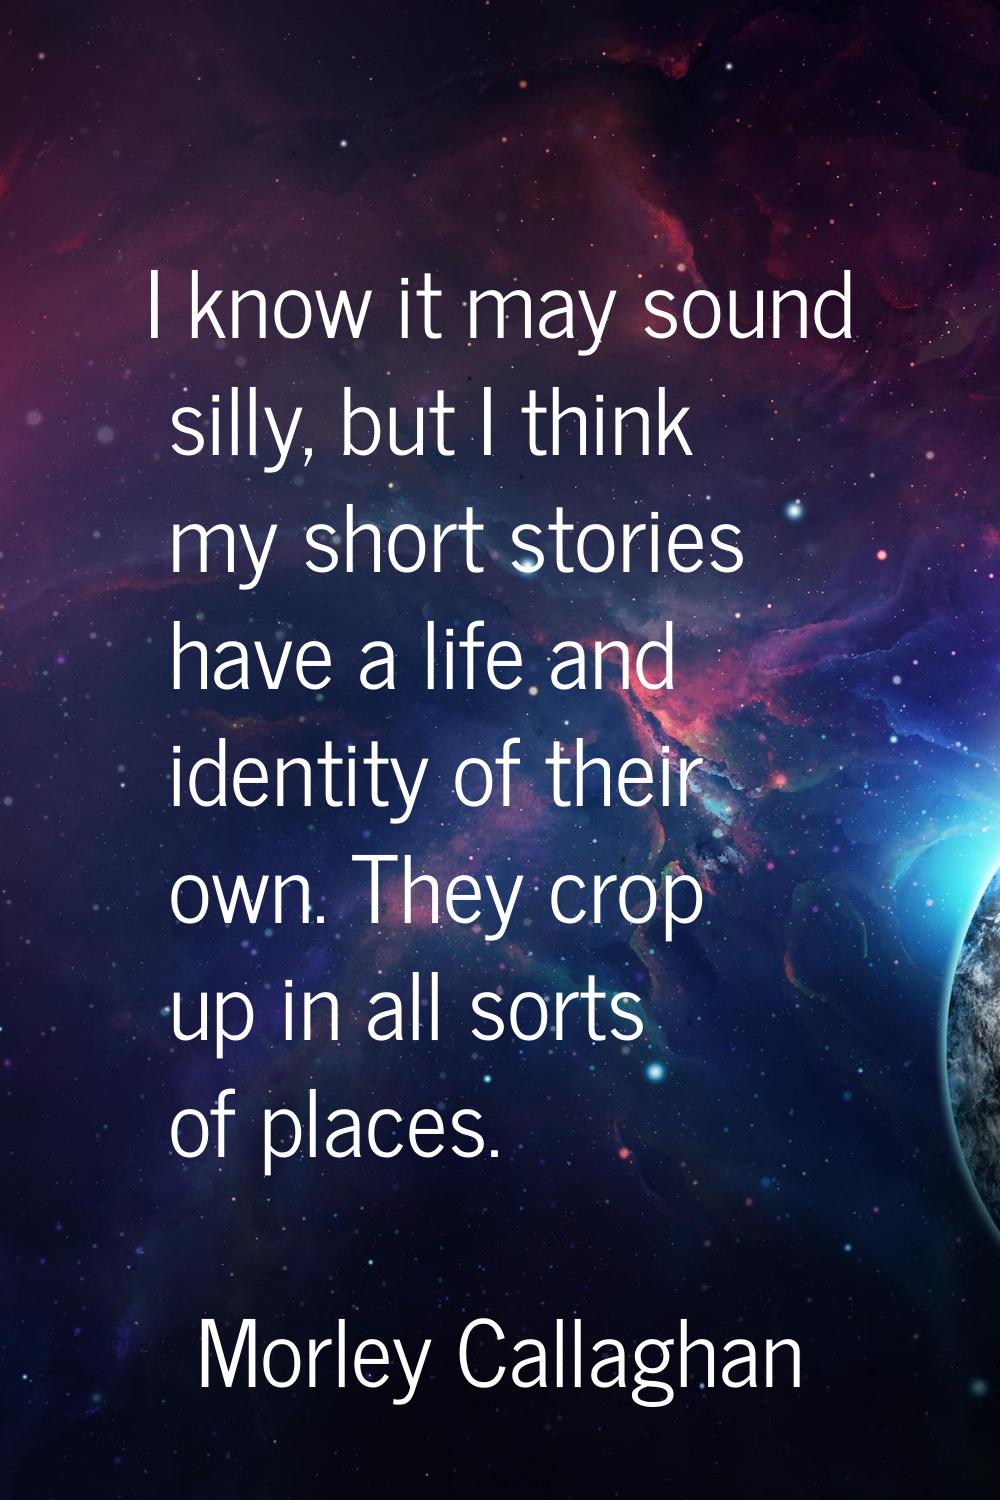 I know it may sound silly, but I think my short stories have a life and identity of their own. They